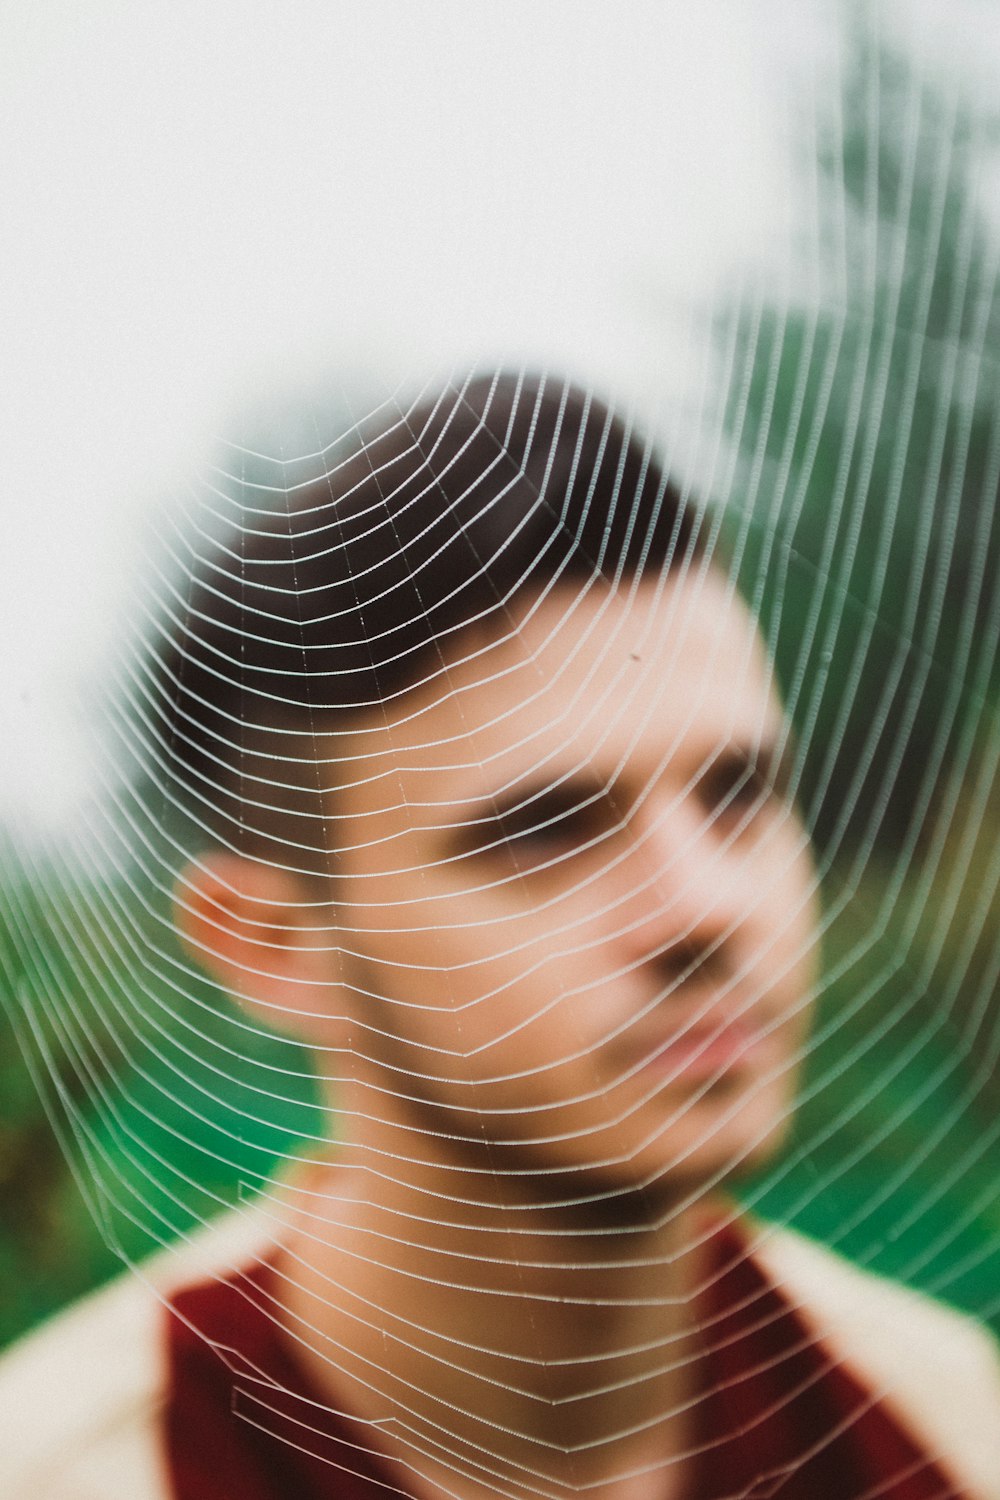 a man is looking at the camera through a spider web